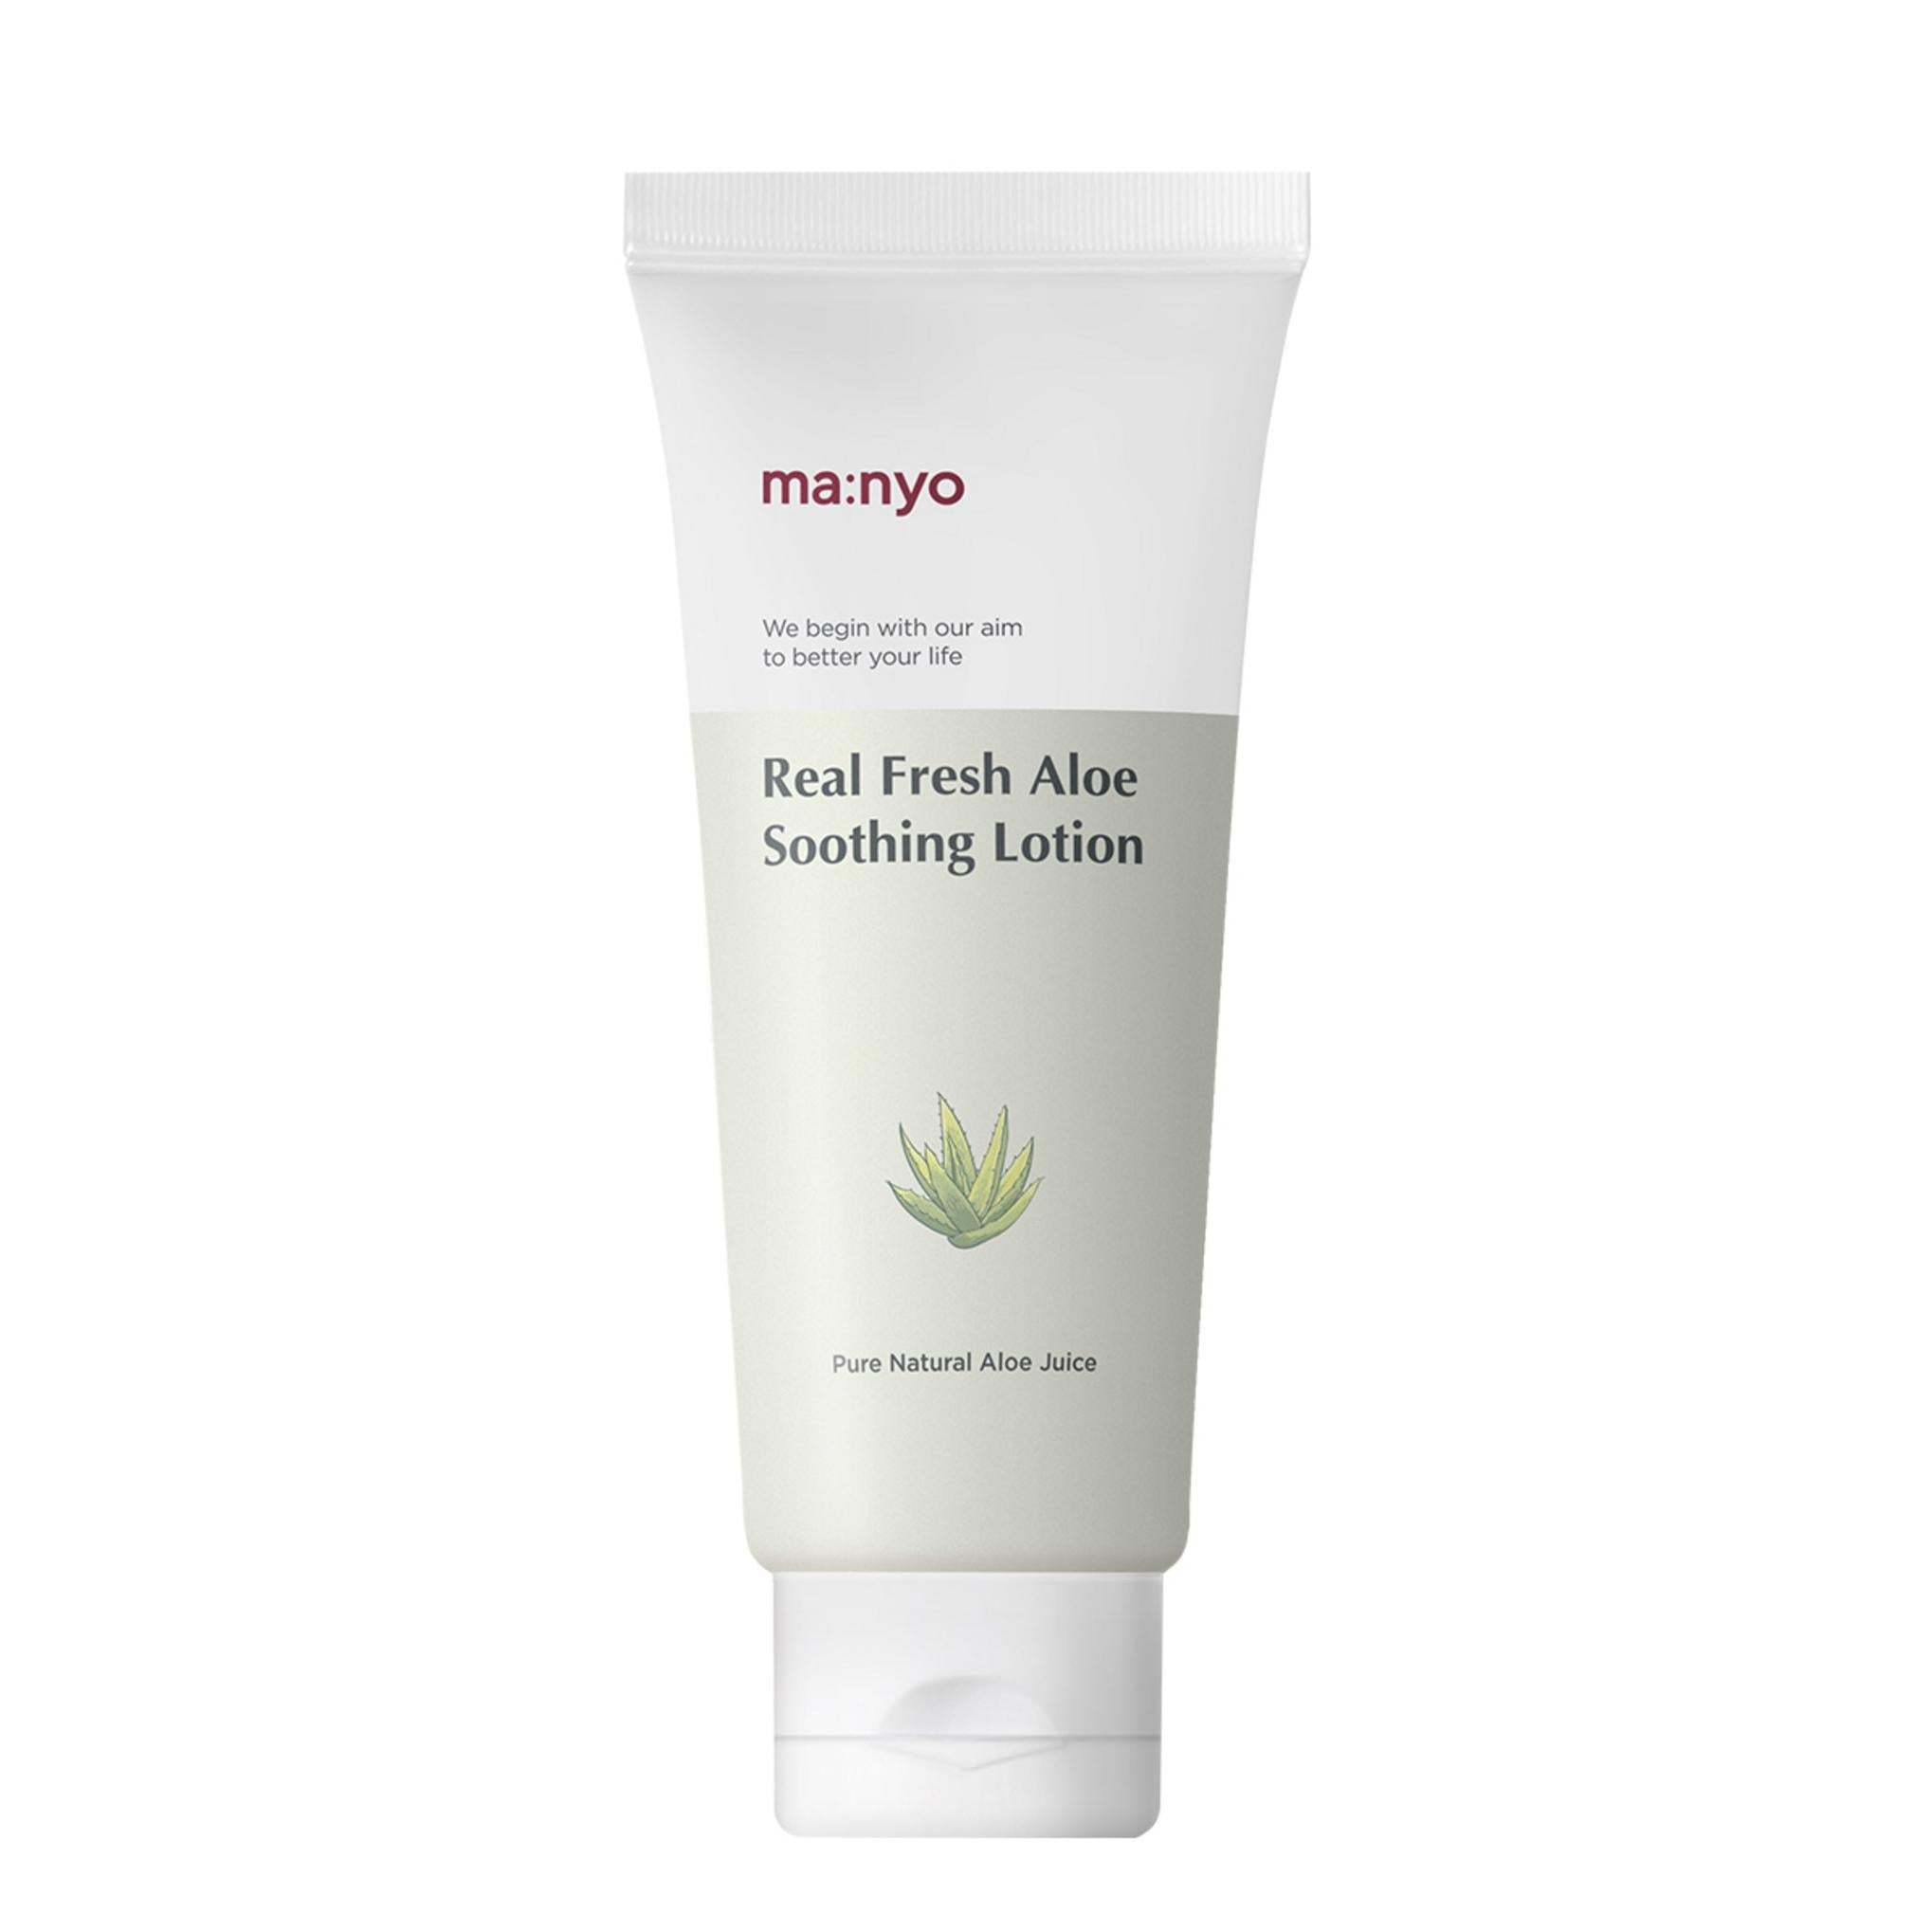 Manyo Factory Aloe Soothing Lotion